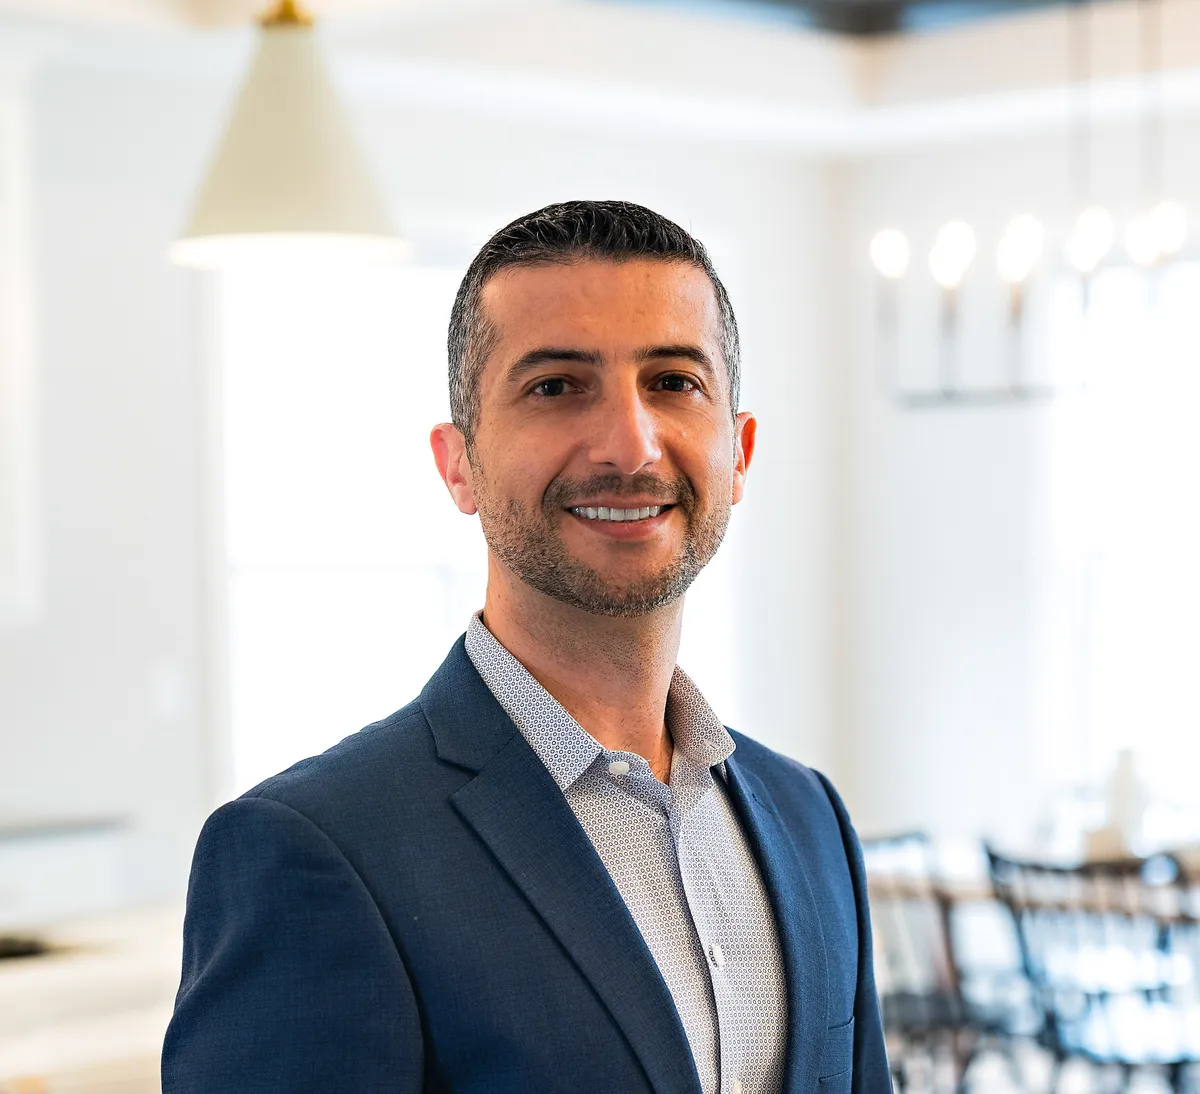 Summit Homes announces the promotion of Zalman Kohen to Chief Executive Officer